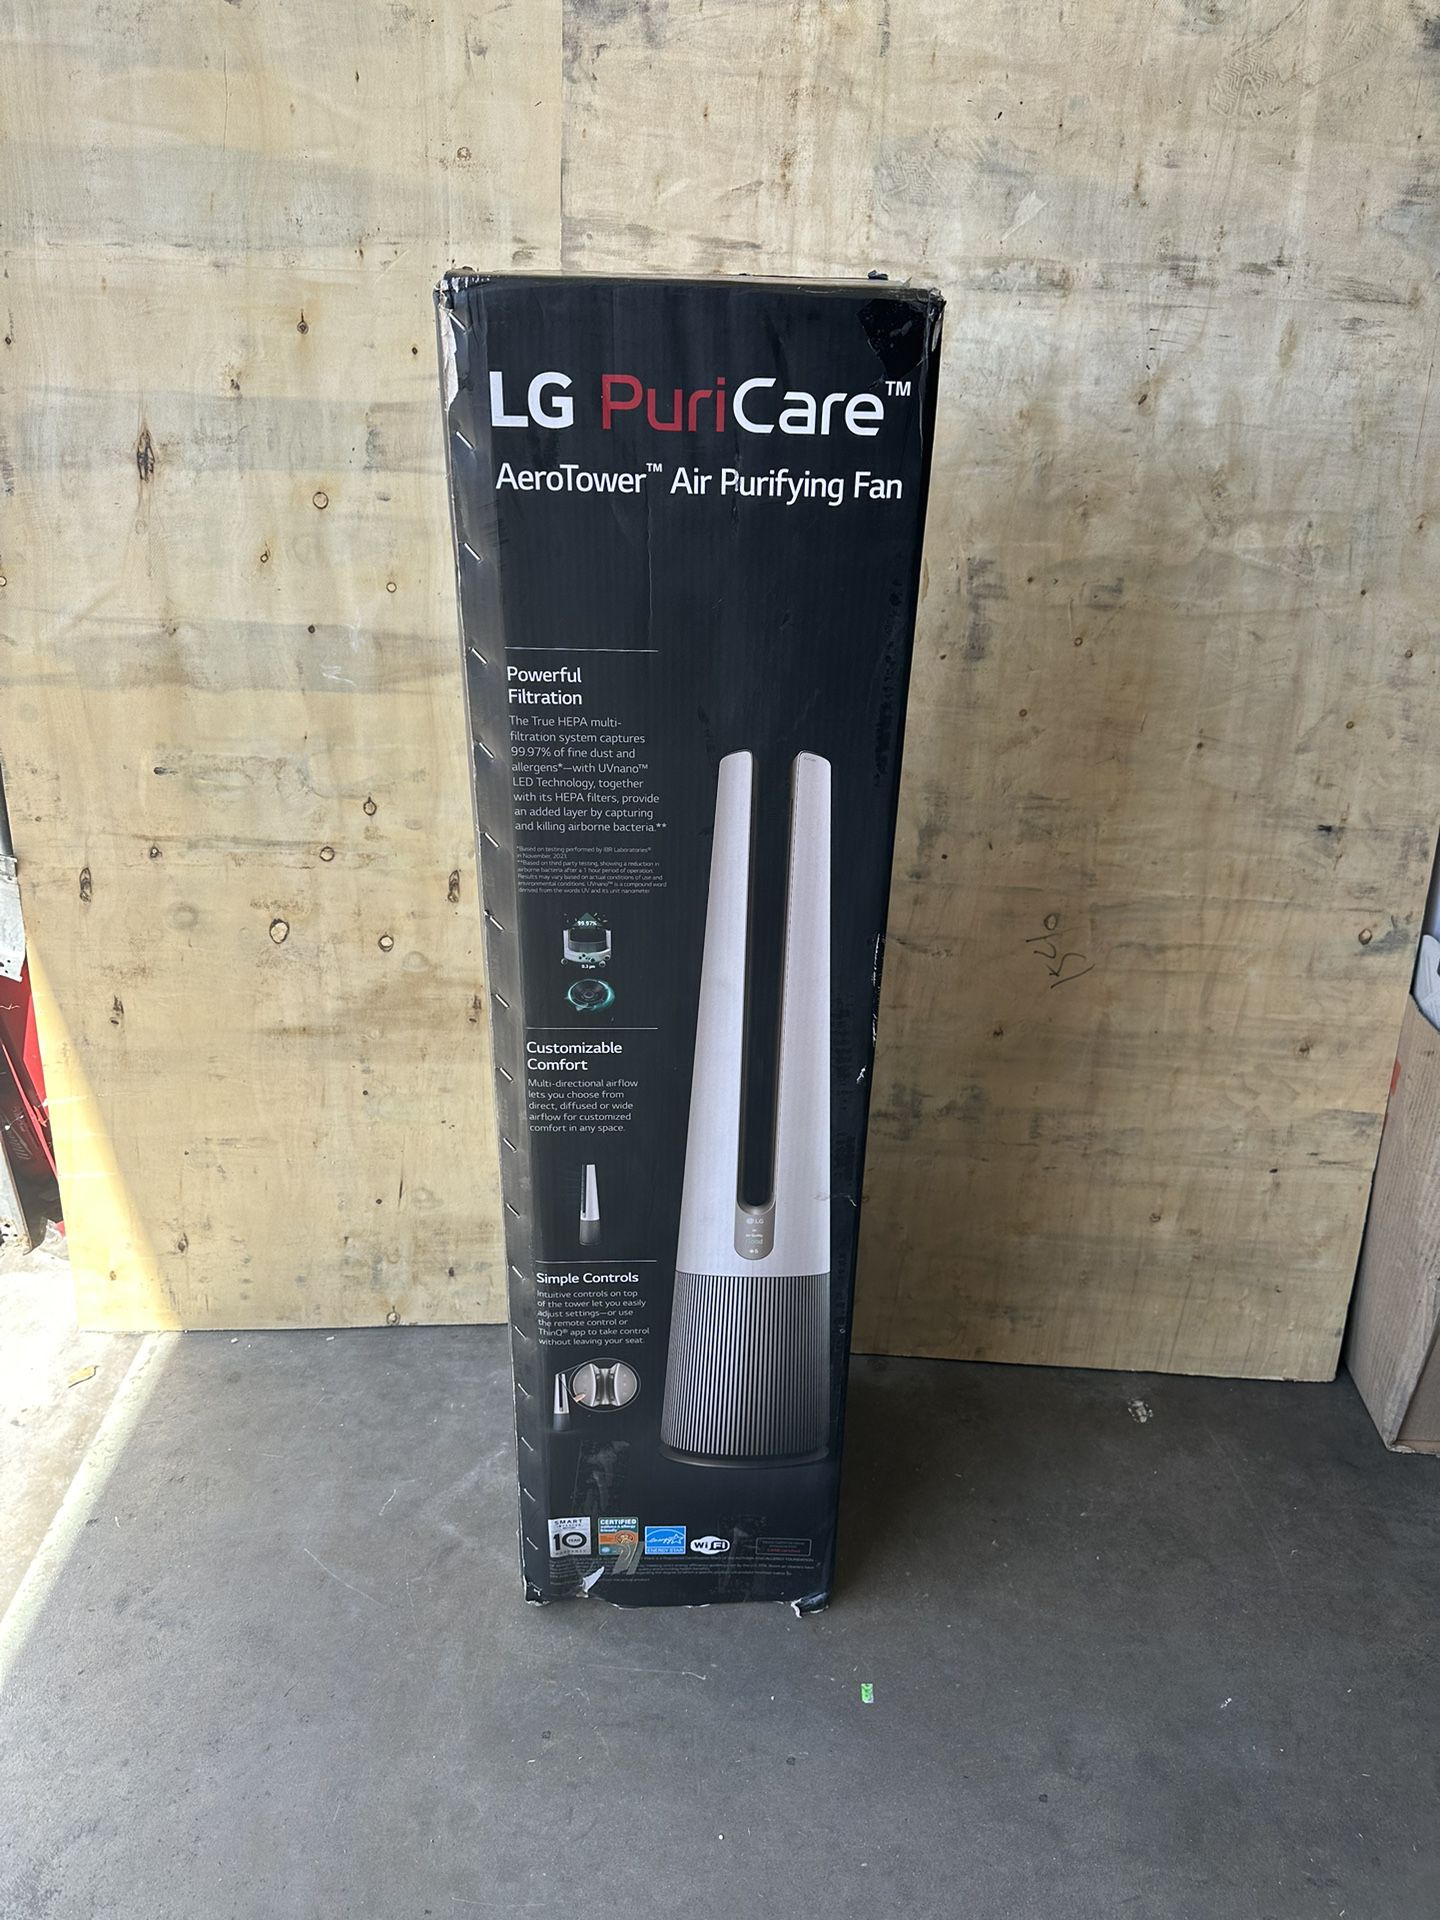 LG LG PuriCare AeroTower True HEPA Air Purifying Fan for Allergens